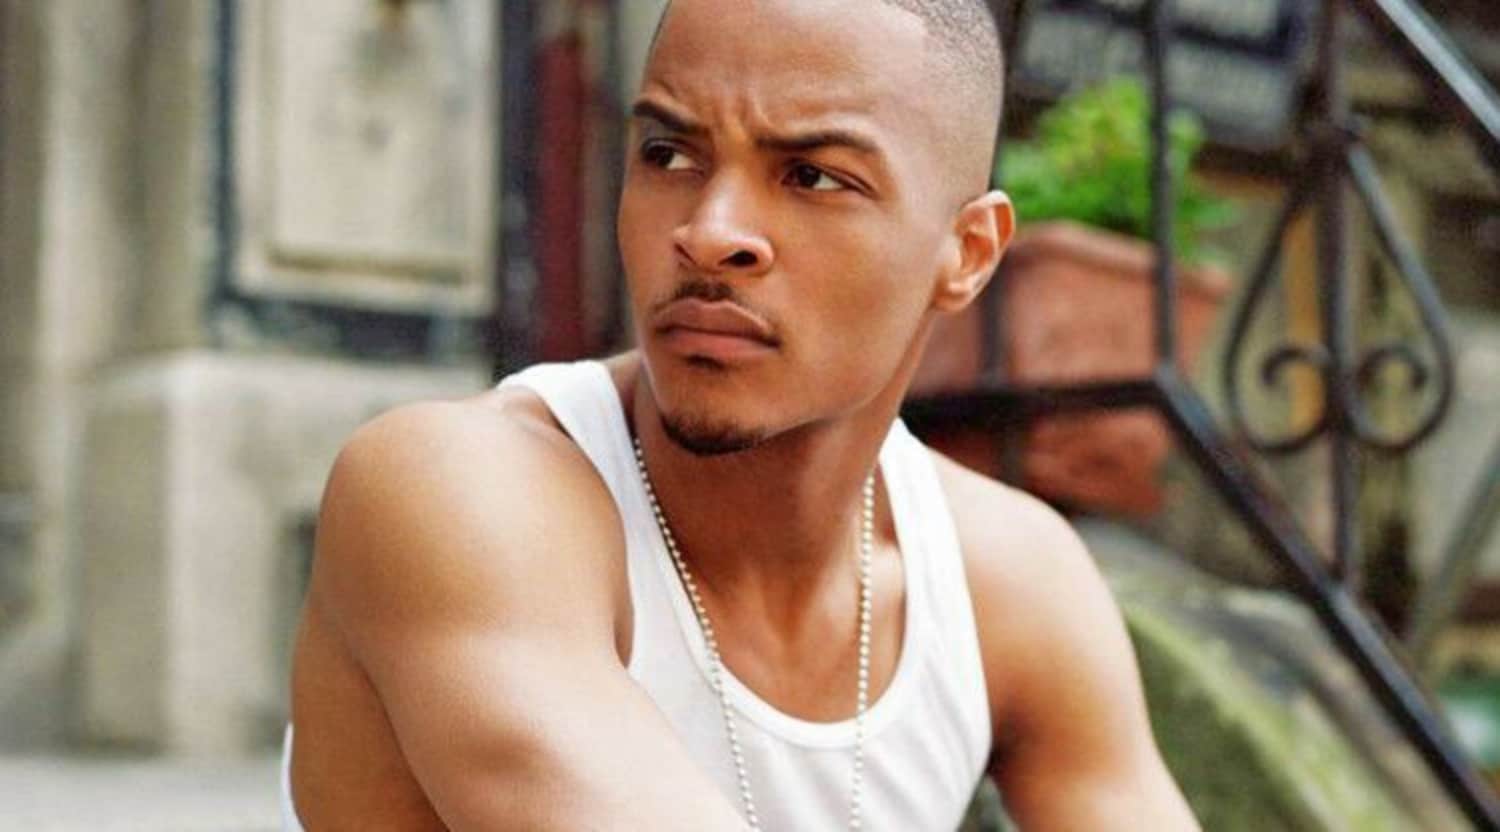 T.I. Is Social Distancing These Days - See His Recent Photos